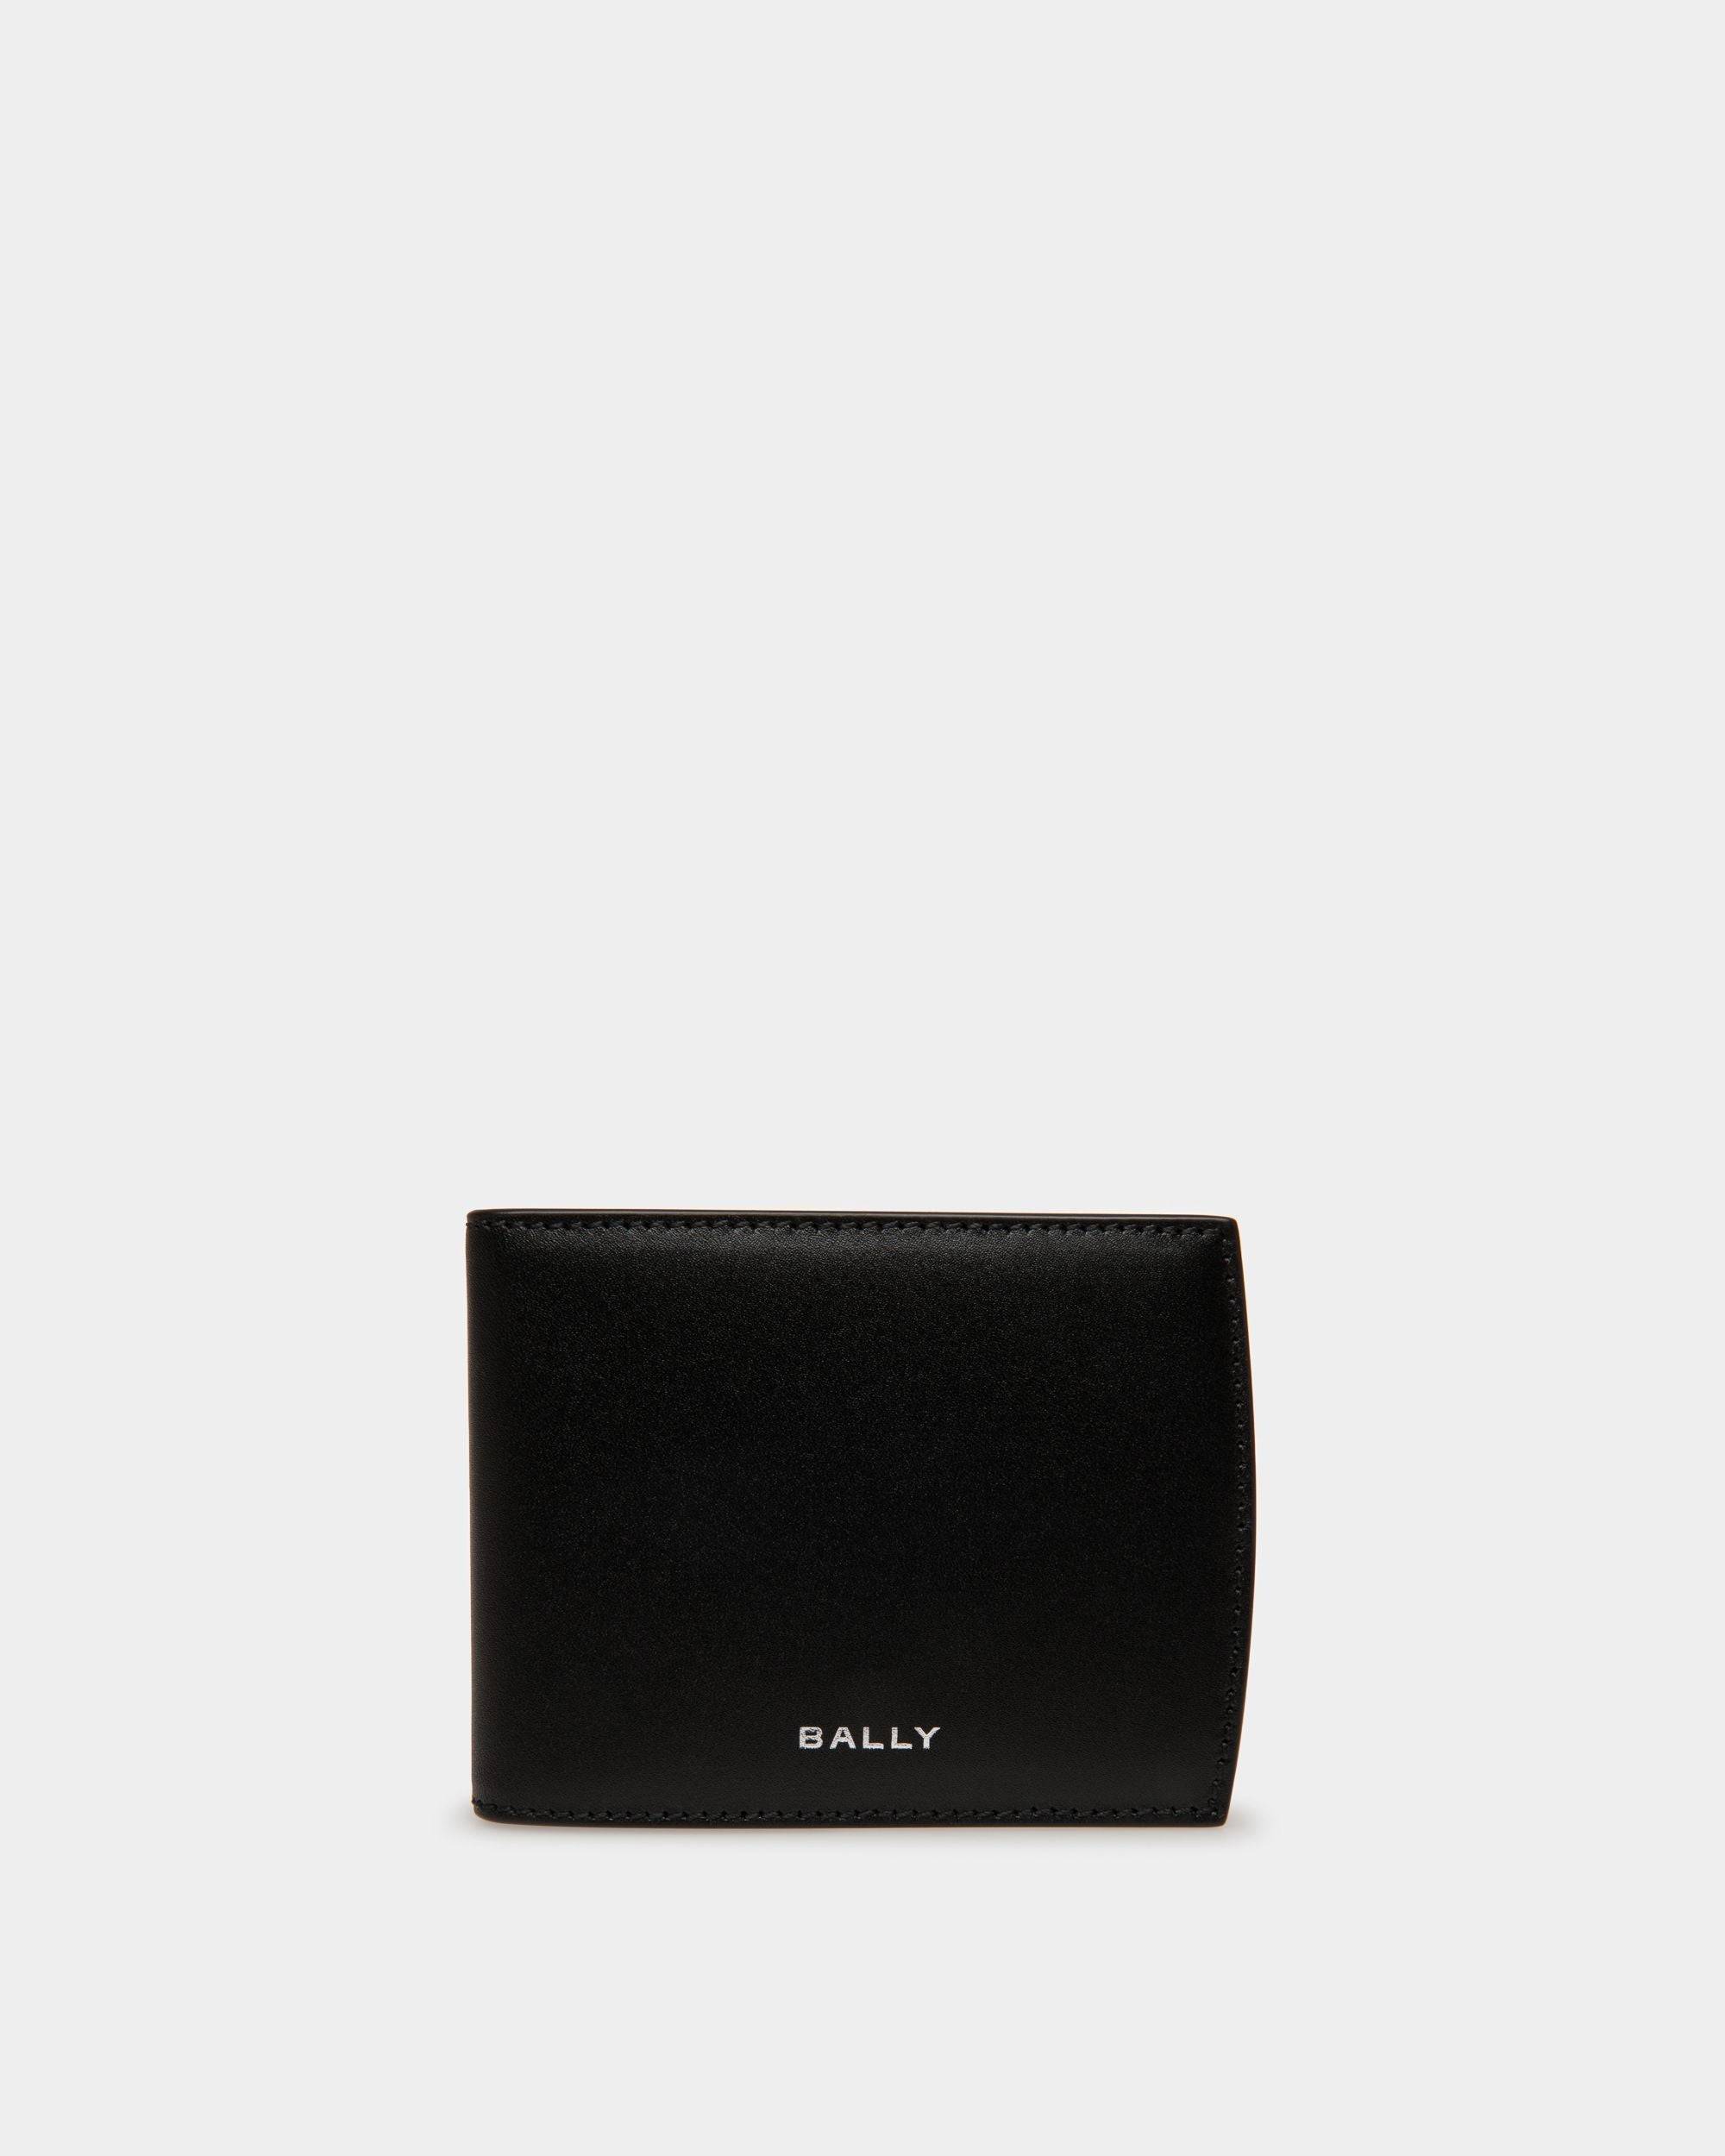 Busy Bally | Men's Bifold Wallet in Black Leather | Bally | Still Life Front